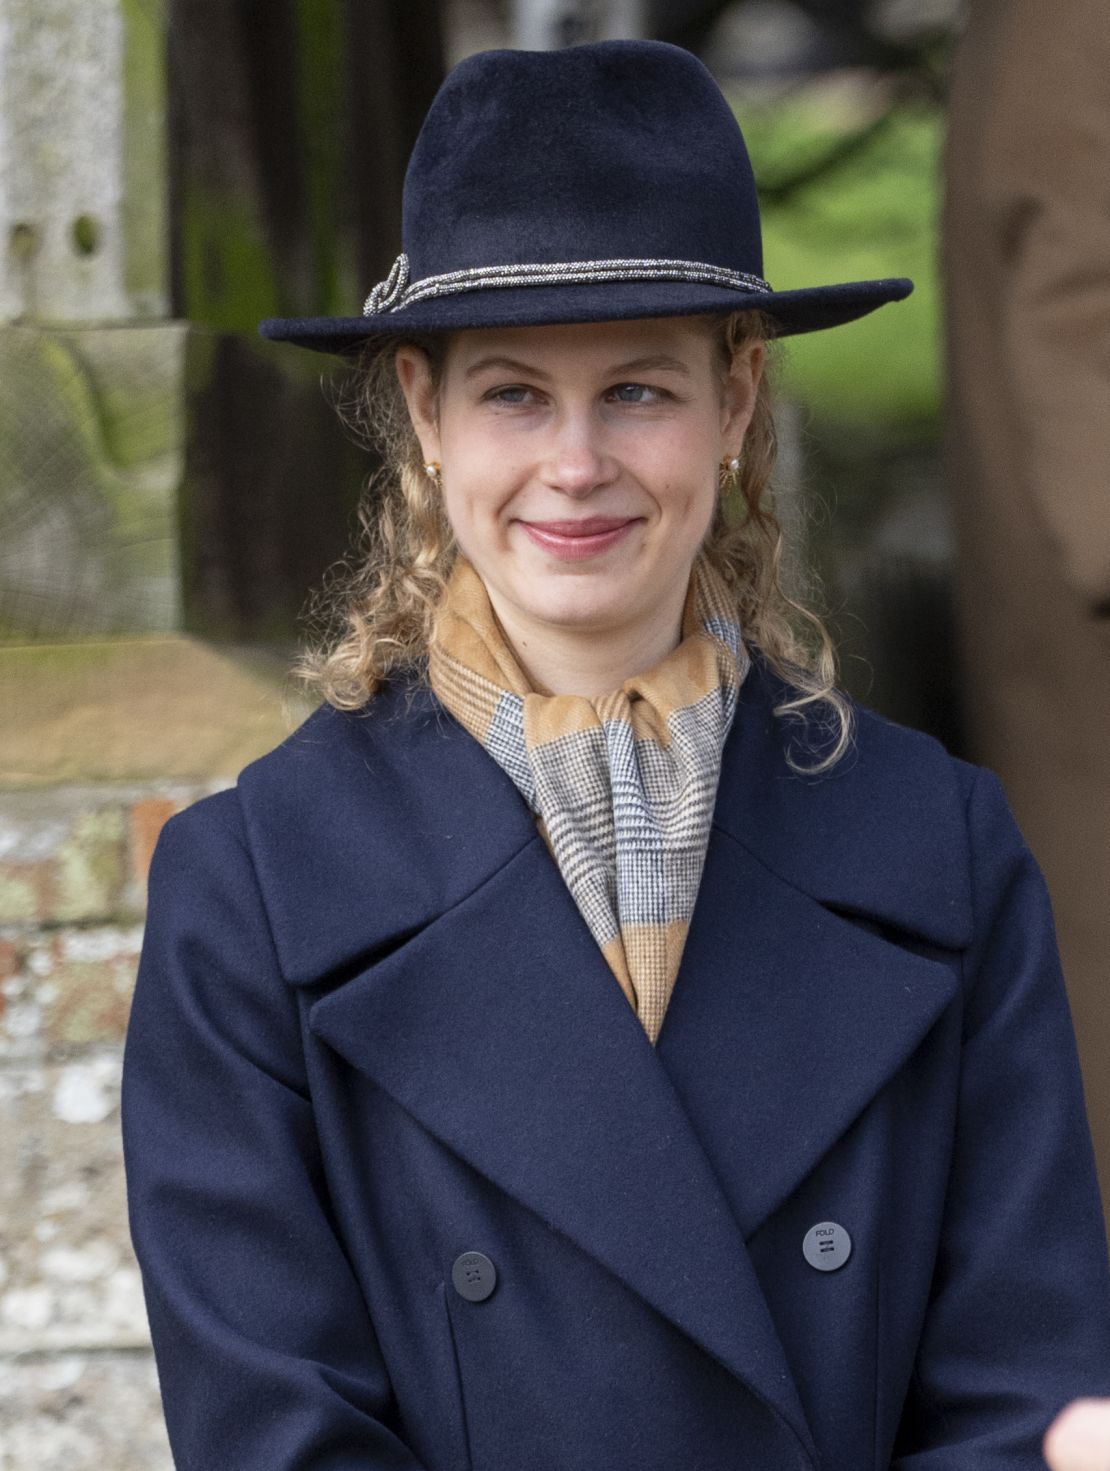 Lady Louise Windsor was also spotted in the scarf, designed by King Charles.